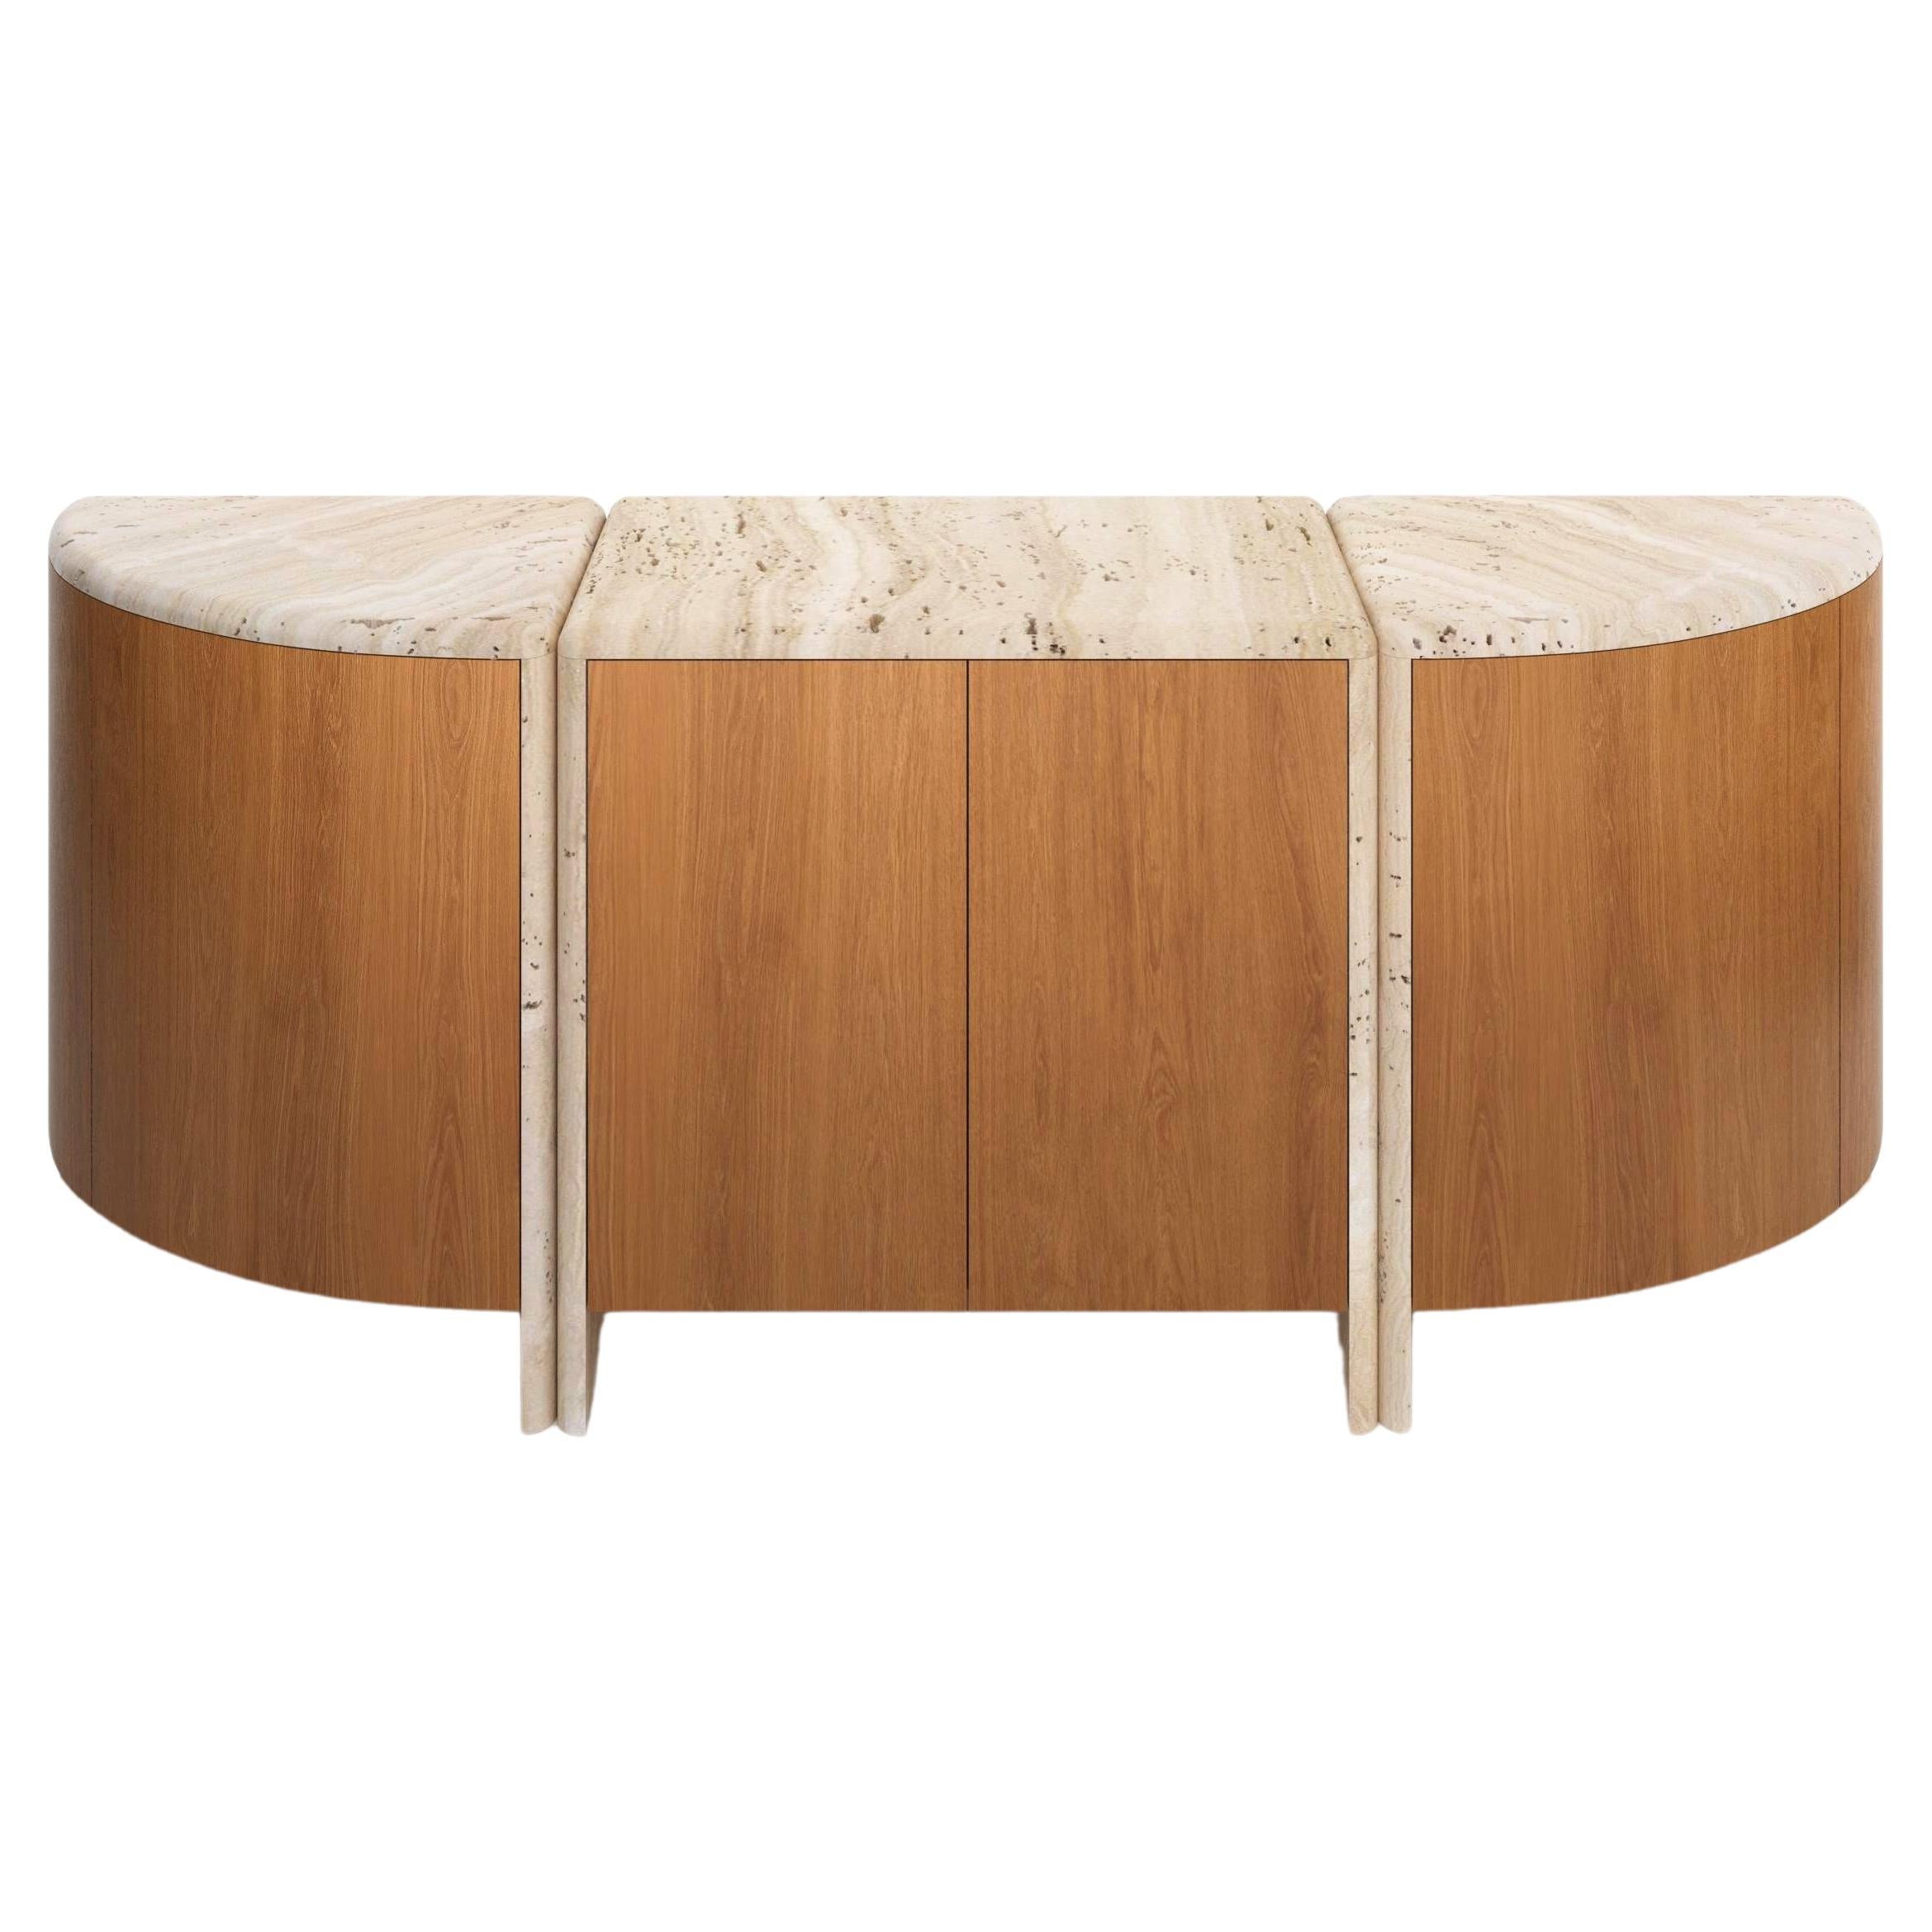 Lily Rounded Credenza in Honed Unfilled Navona Travertine and Oak by Fred&Juul For Sale